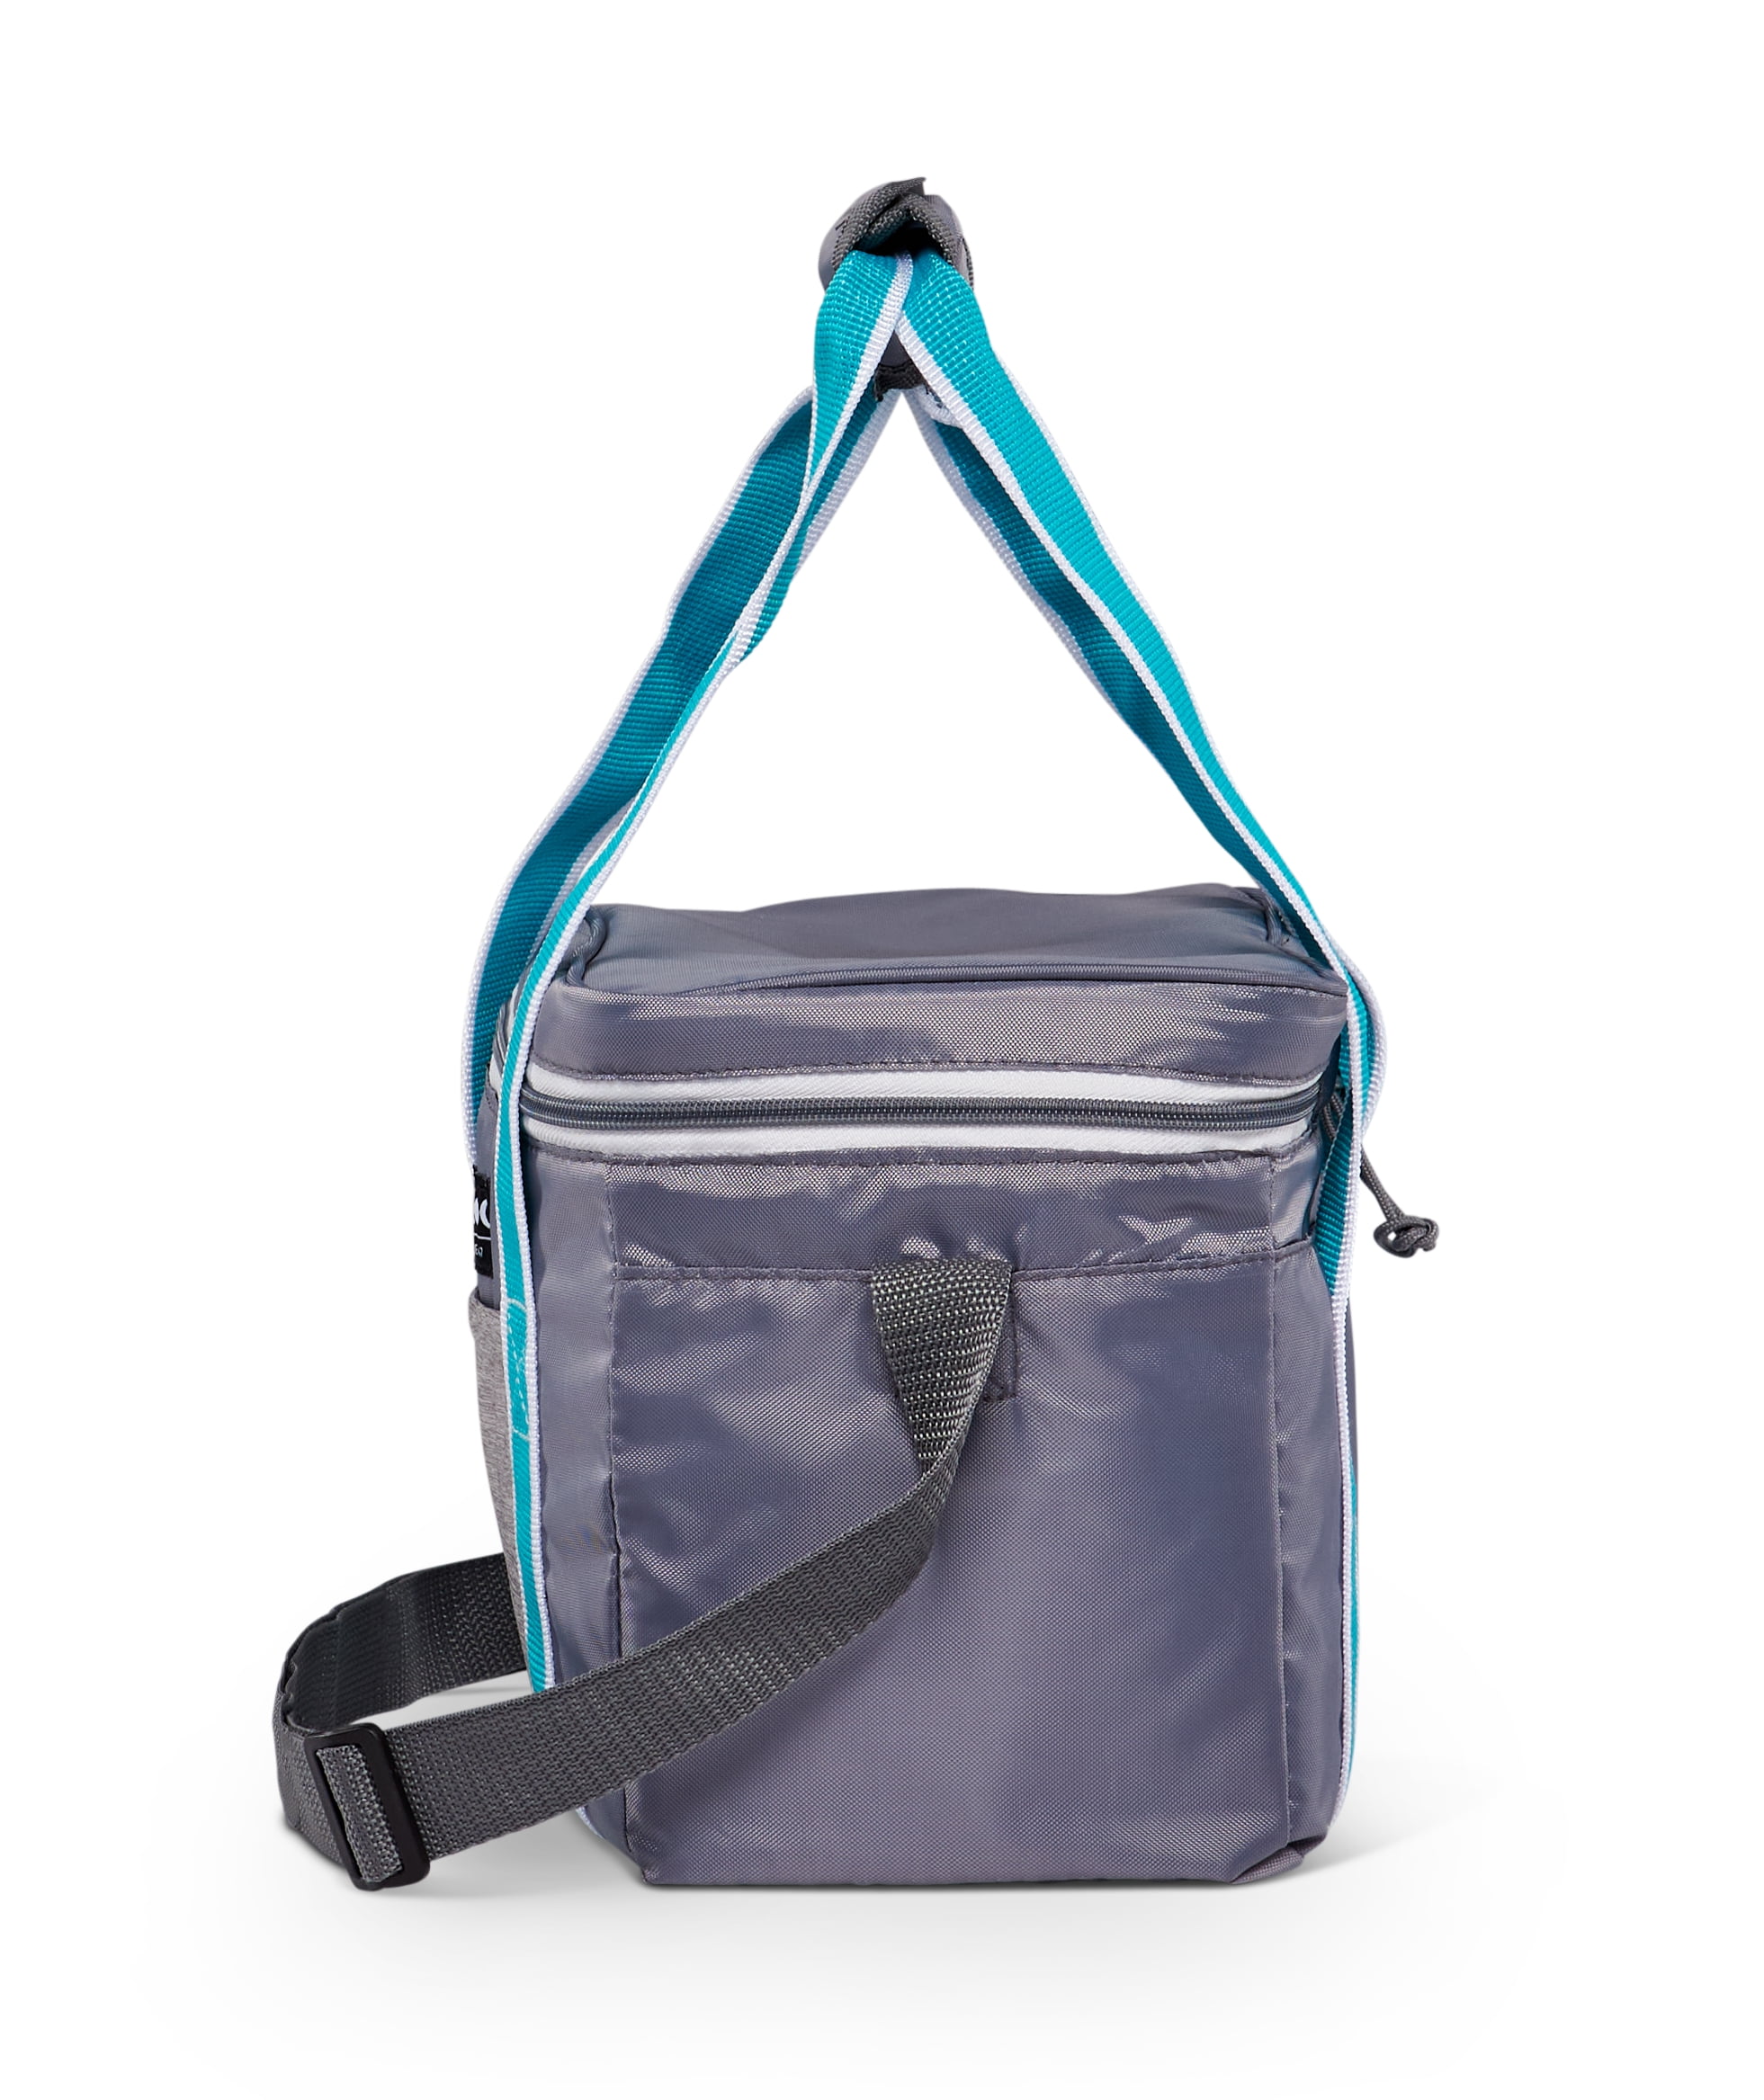 Igloo Repreve Carry All Lunch Bag with Pack In - Navy Butterfly